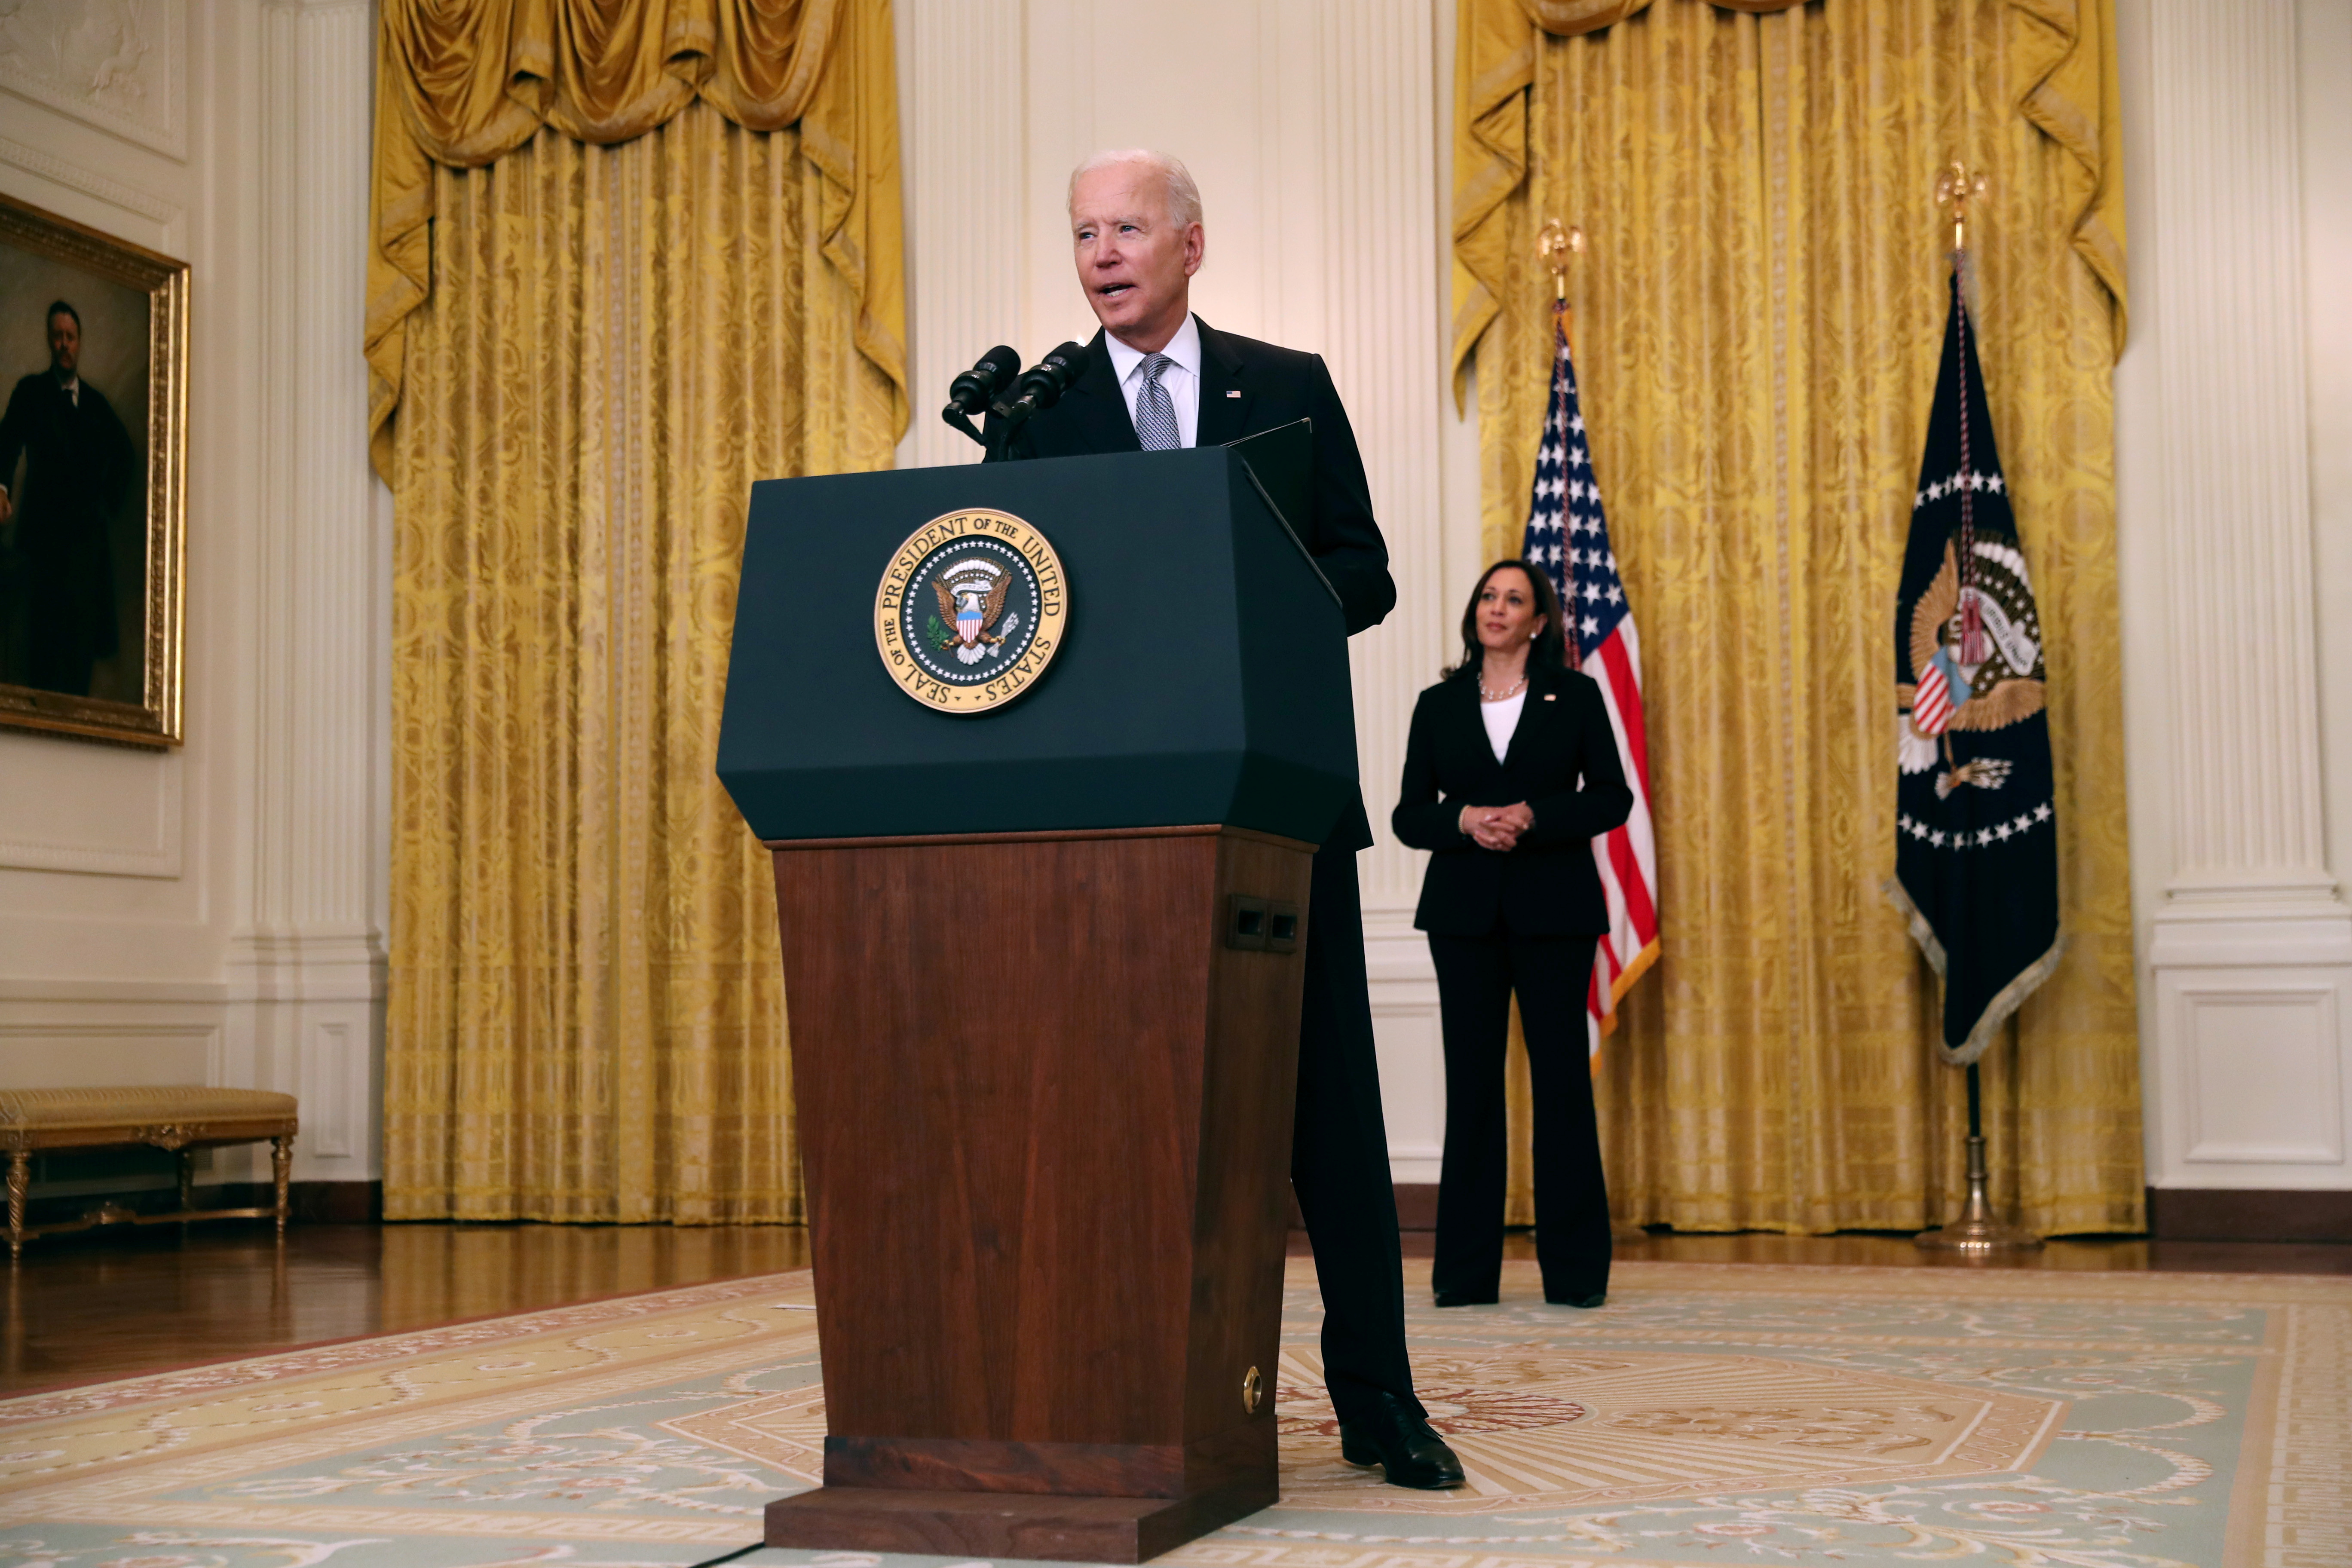 U.S. President Joe Biden delivers remarks from the East Room of the White House in Washington